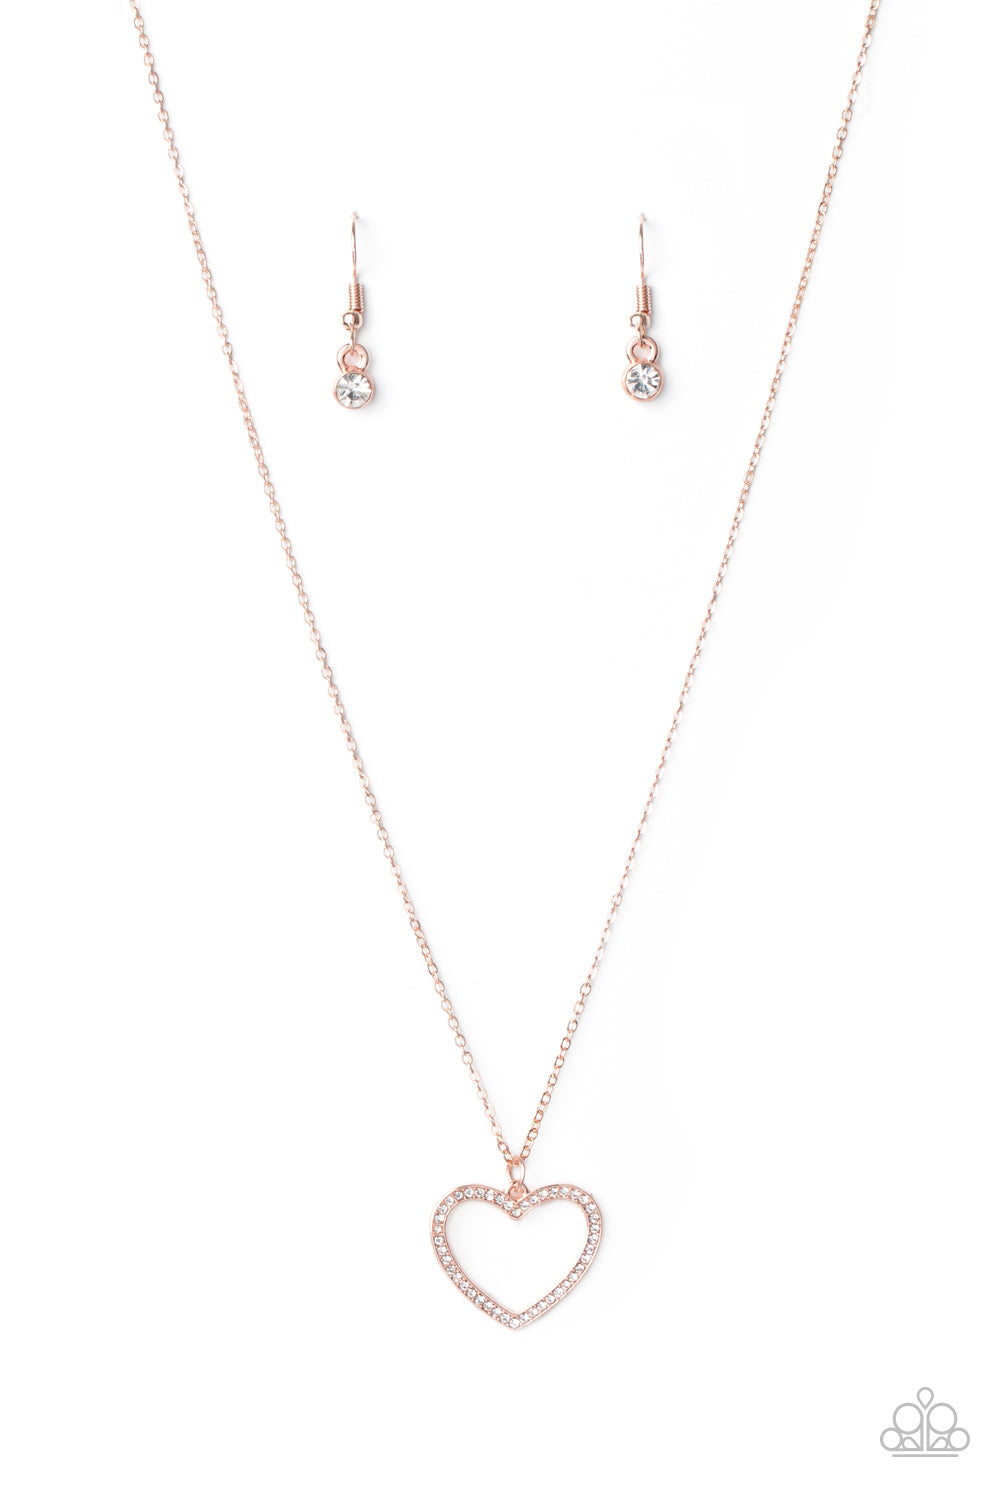 GLOW by Heart - Rose Gold necklace 1950